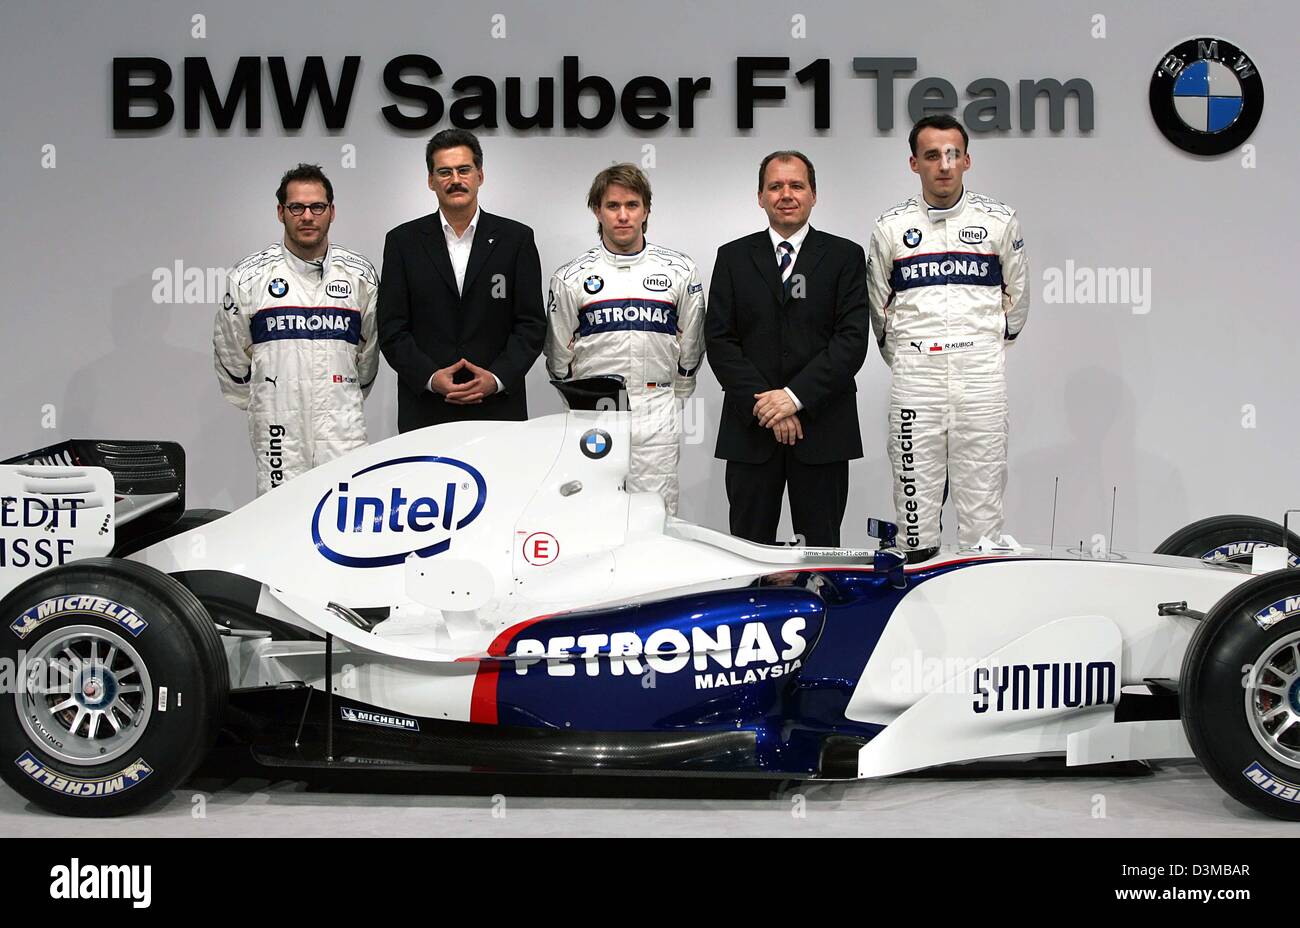 (dpa) - Canadian Formula One pilot Jaques Villeneuve, director of BMW Motorsport Mario Theissen, German pilot Nick Heidfeld, czech director Willy Rampf and Polish test driver Robert Kubica (L-R) pose for photographers during the presentation of the new BMW Sauber race car 'F1.06' in Valencia, Spain, Tuesday 17 January 2006. Photo: Gero Breloer Stock Photo